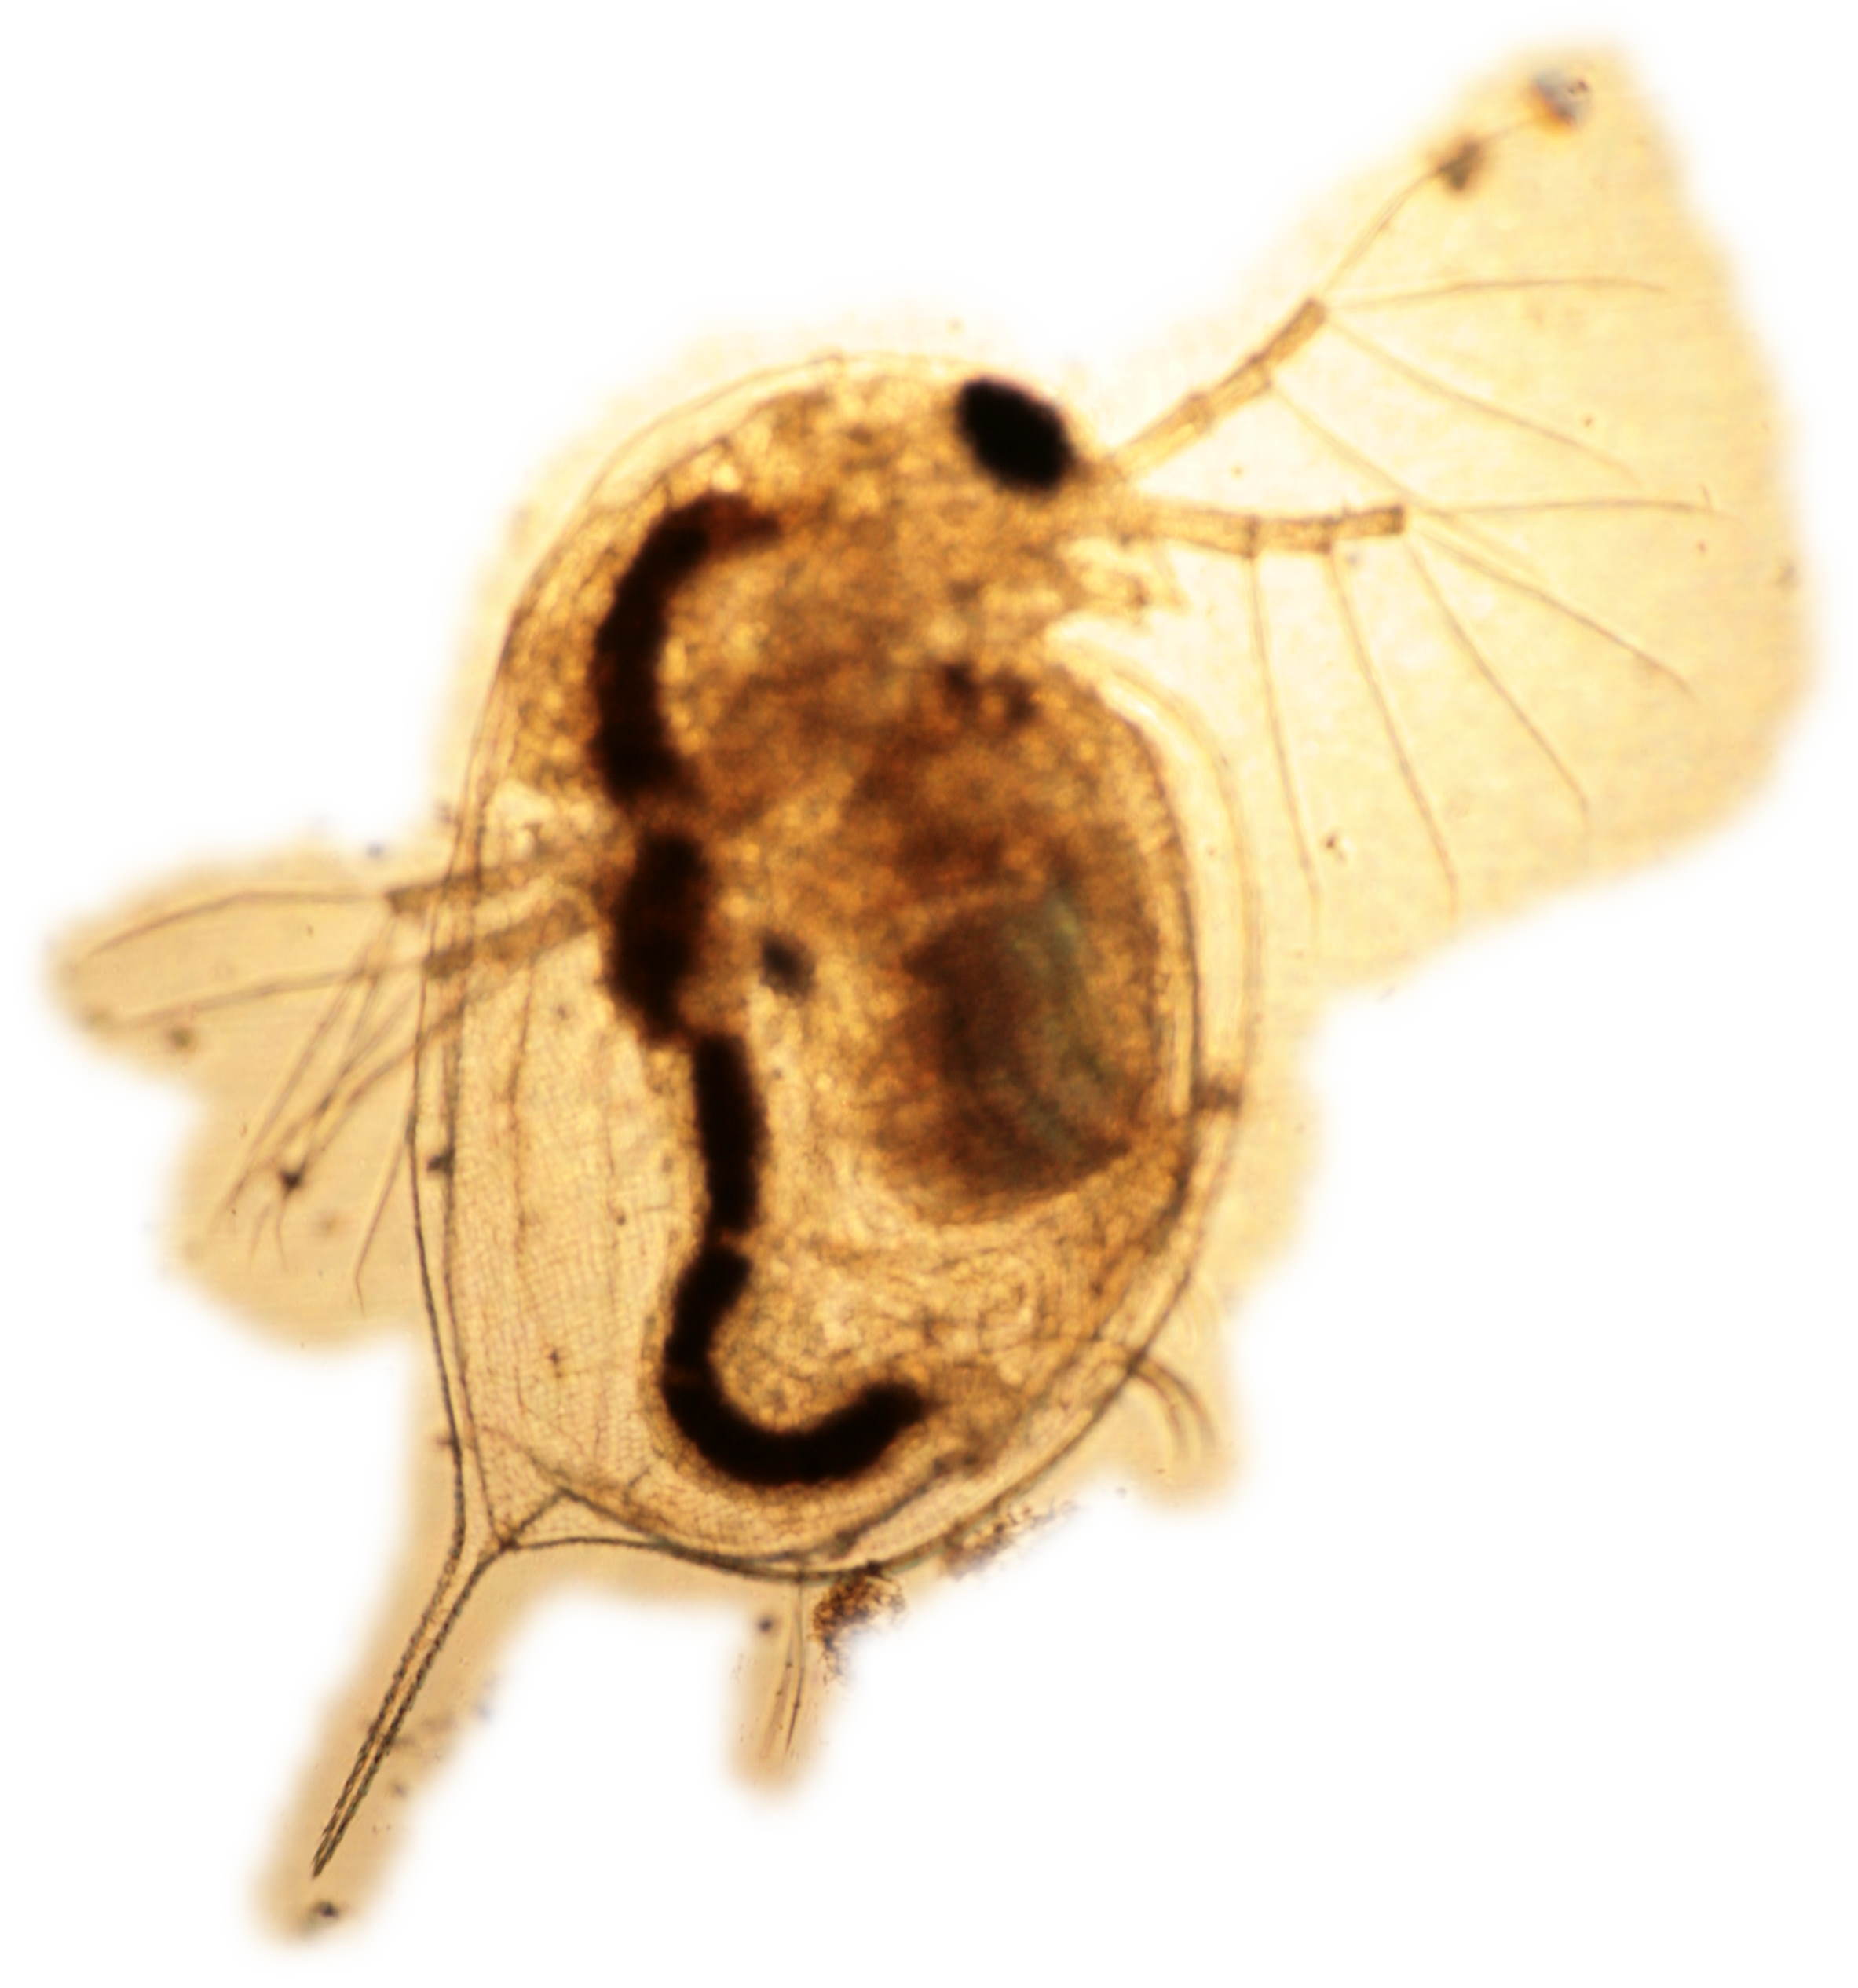 Focusing on the bottom of a Daphnia